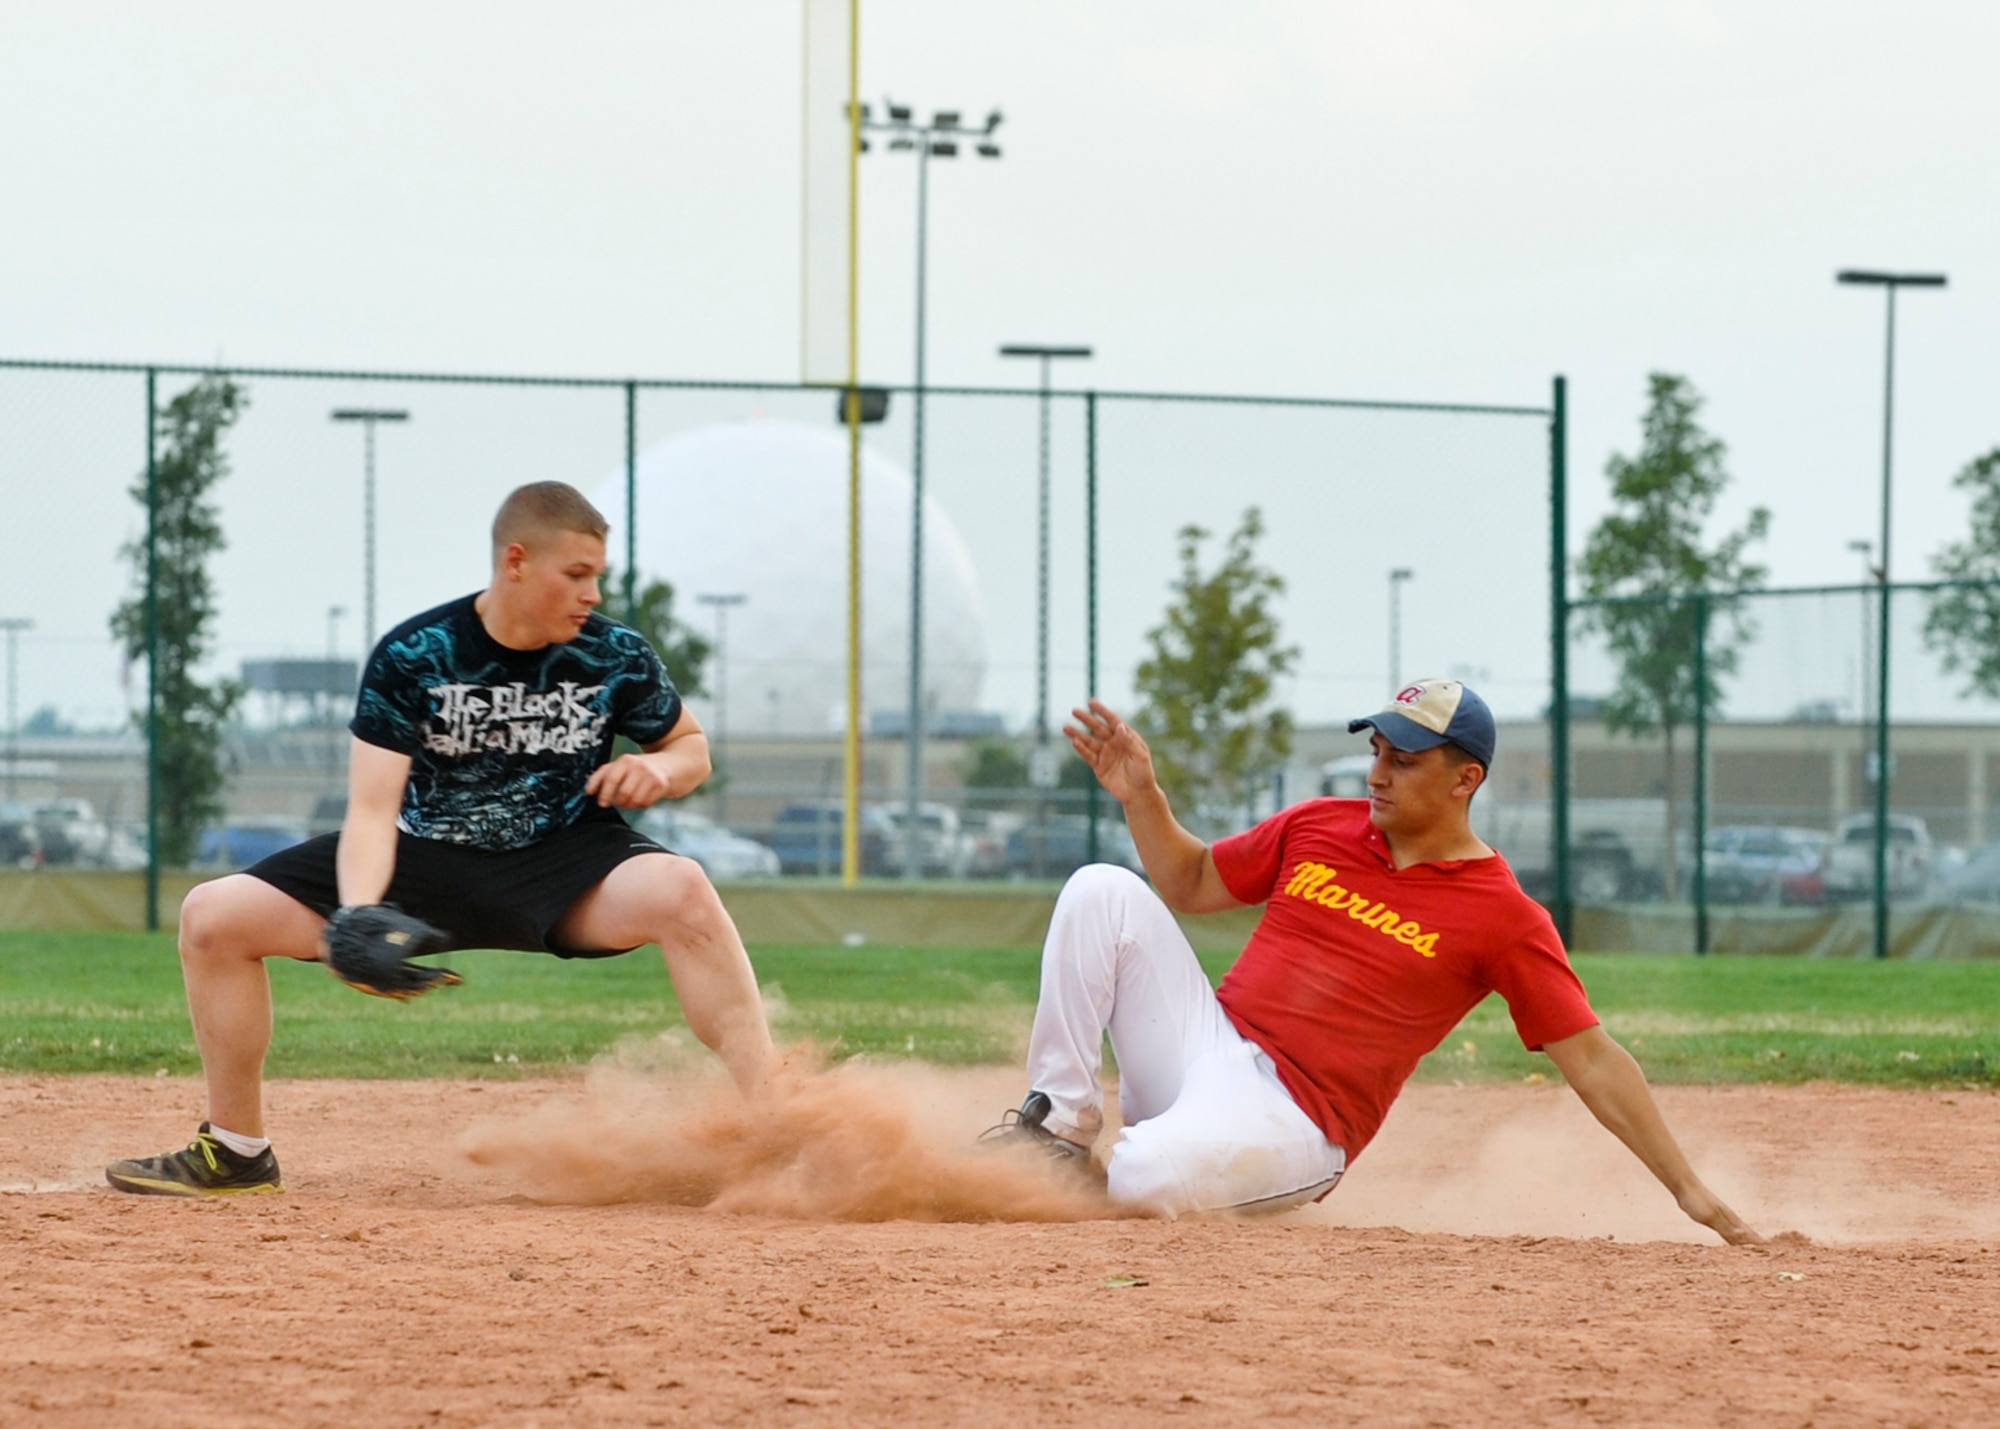 BUCKLEY AIR FORCE BASE, Colo. – J.R. Huerta slides into second base during a game of intramural softball Aug. 9, 2012. Huerta is a lance corporal assigned to the Marine Air Control Squadron 23. MACS 23 beat the Navy Operational Support Center, Denver with a score of 24-1. (U.S. Air Force photo by Senior Airman Christopher Gross)